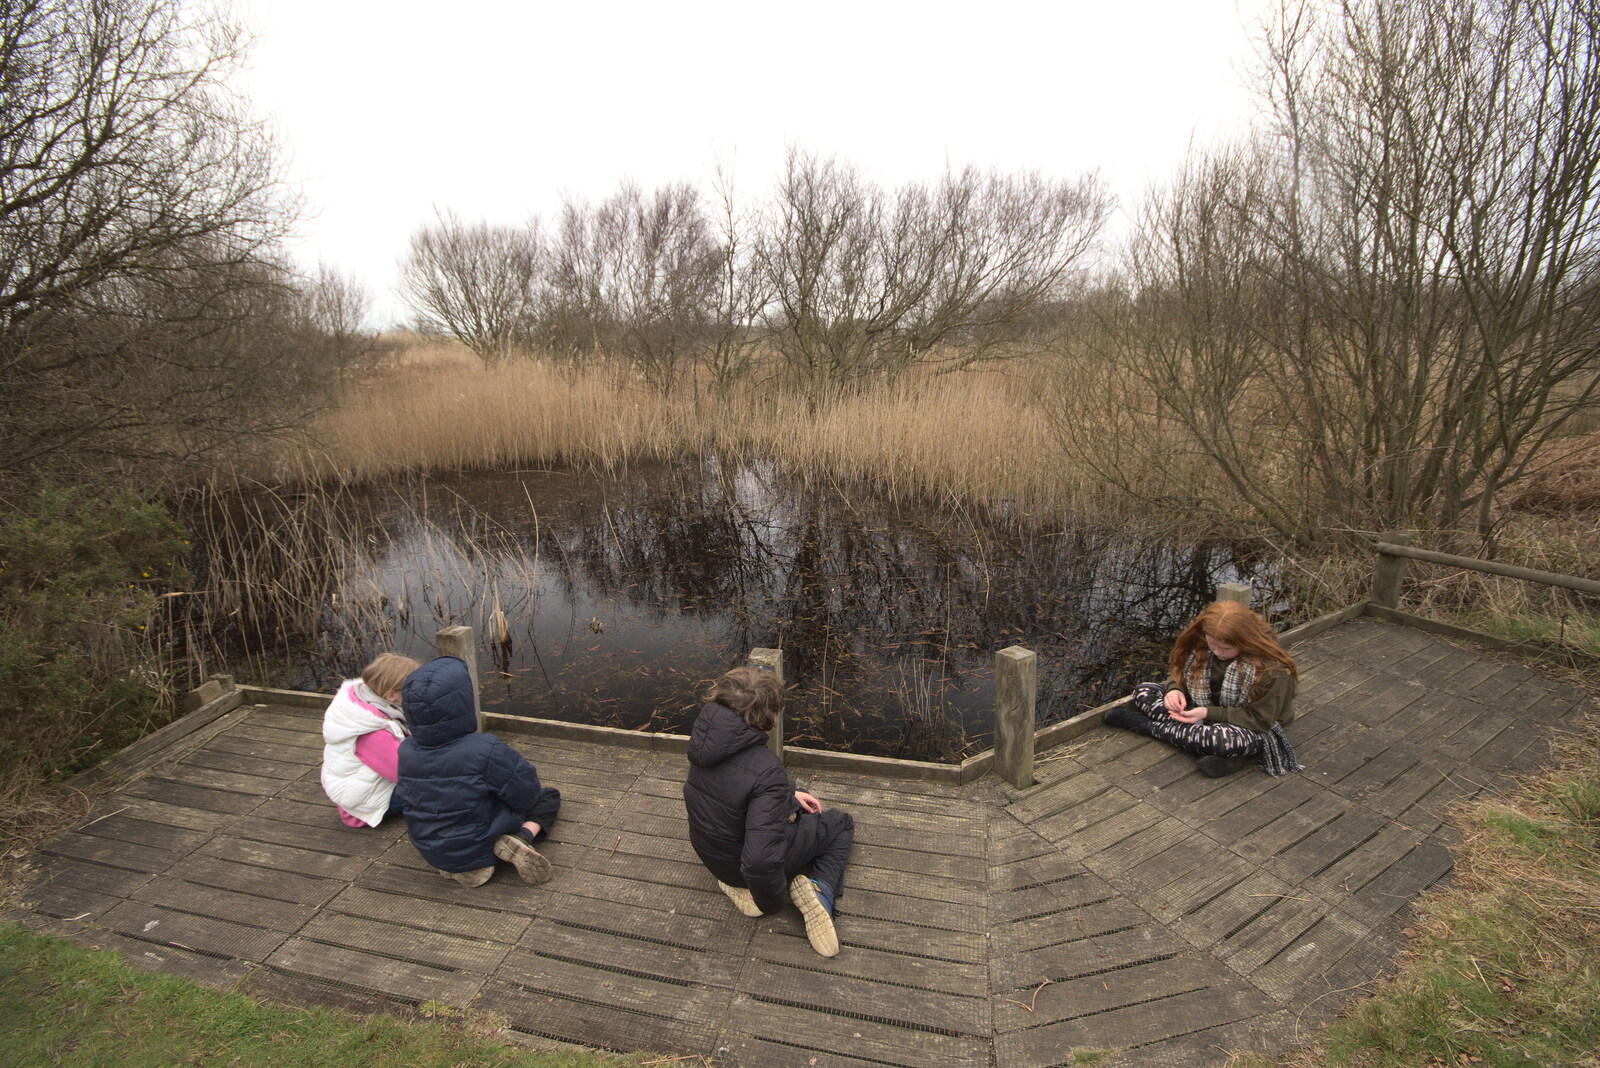 Sitting on the boards by the dark pond from A Trip to Dunwich Beach, Dunwich, Suffolk - 2nd April 2021